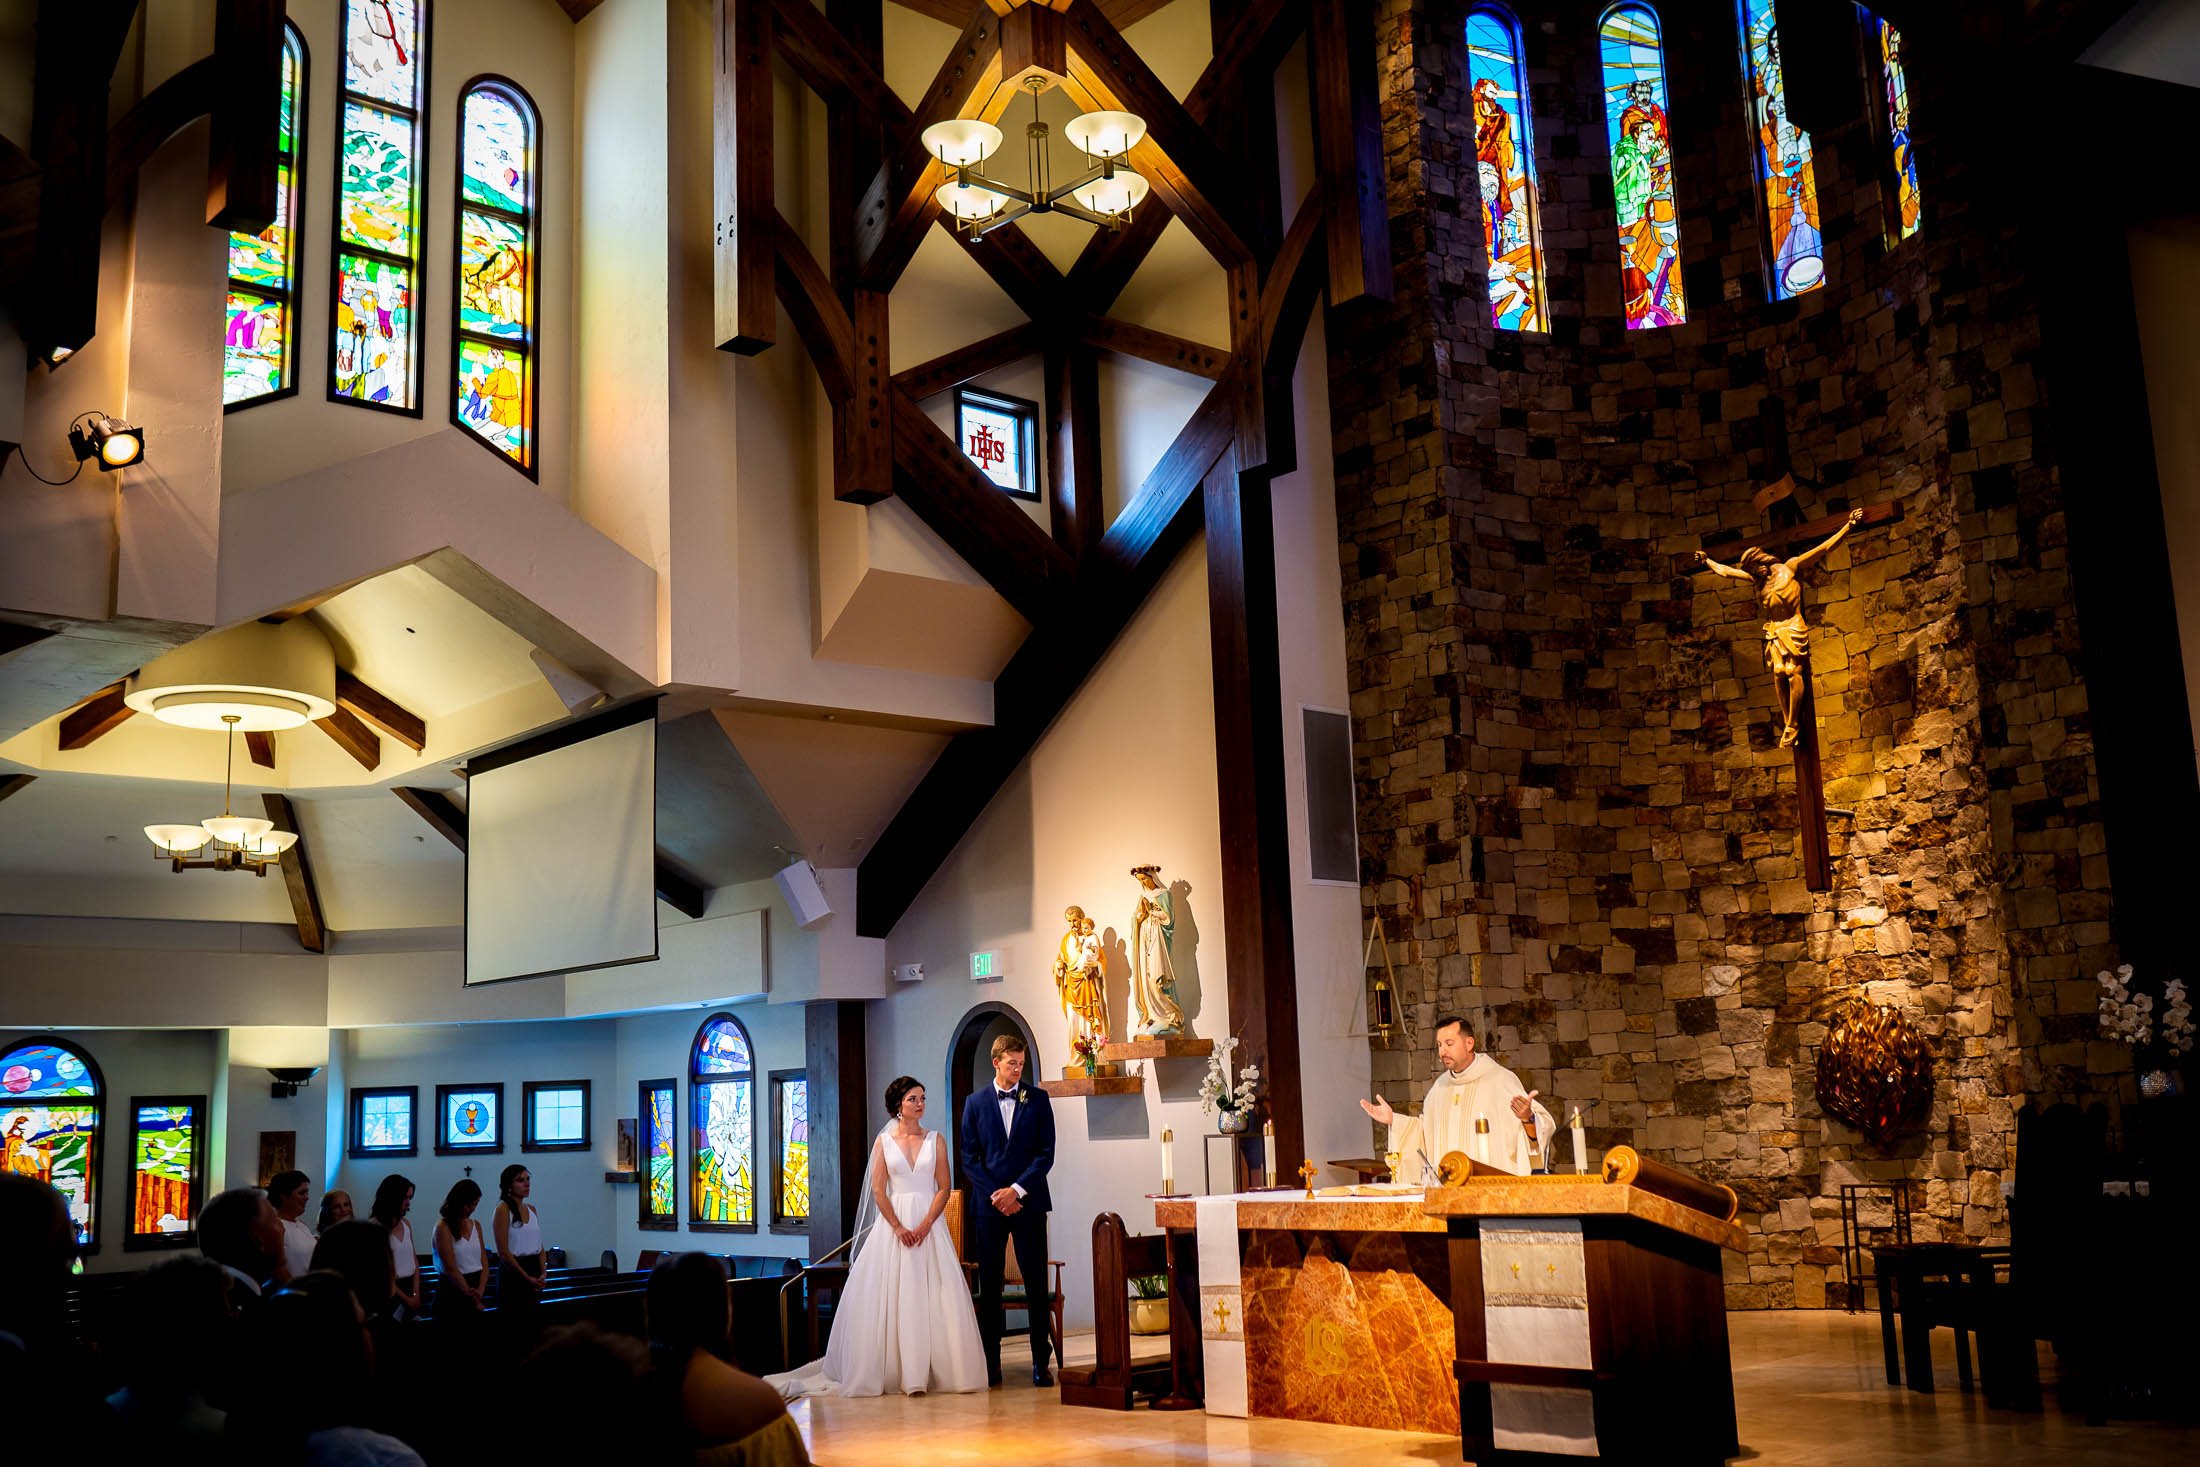 Bride and groom attend their catholic wedding ceremony at the church in a wide photography where you can see stained glass windows, wedding, wedding photos, wedding photography, wedding photographer, wedding inspiration, wedding photo inspiration, wedding portraits, wedding ceremony, wedding reception, mountain wedding, Catholic Church wedding, Catholic Church wedding photos, Catholic Church wedding photography, Catholic Church wedding photographer, Catholic Church wedding inspiration, Catholic Church wedding venue, Steamboat Springs wedding, Steamboat Springs wedding photos, Steamboat Springs wedding photography, Steamboat Springs wedding photographer, Colorado wedding, Colorado wedding photos, Colorado wedding photography, Colorado wedding photographer, Colorado mountain wedding, Colorado wedding inspiration